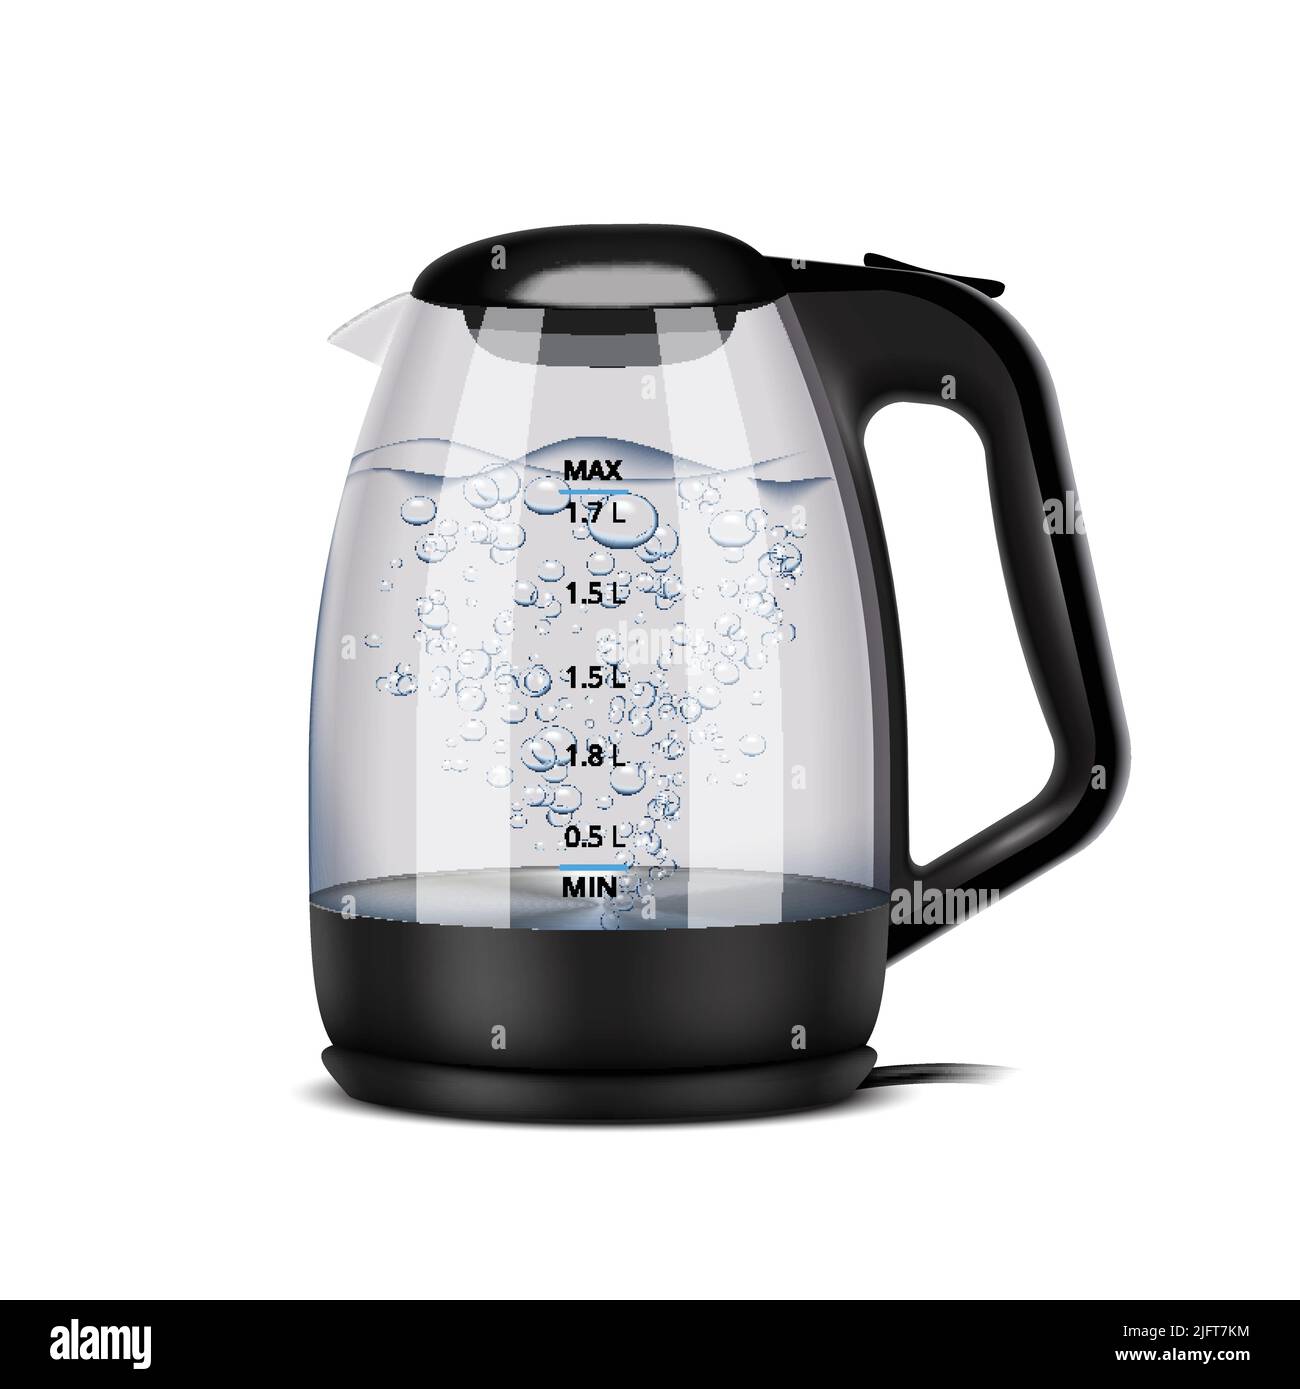 https://c8.alamy.com/comp/2JFT7KM/electric-kettle-realistic-composition-with-isolated-image-of-glass-kettle-with-plastic-handle-and-boiling-water-vector-illustration-2JFT7KM.jpg